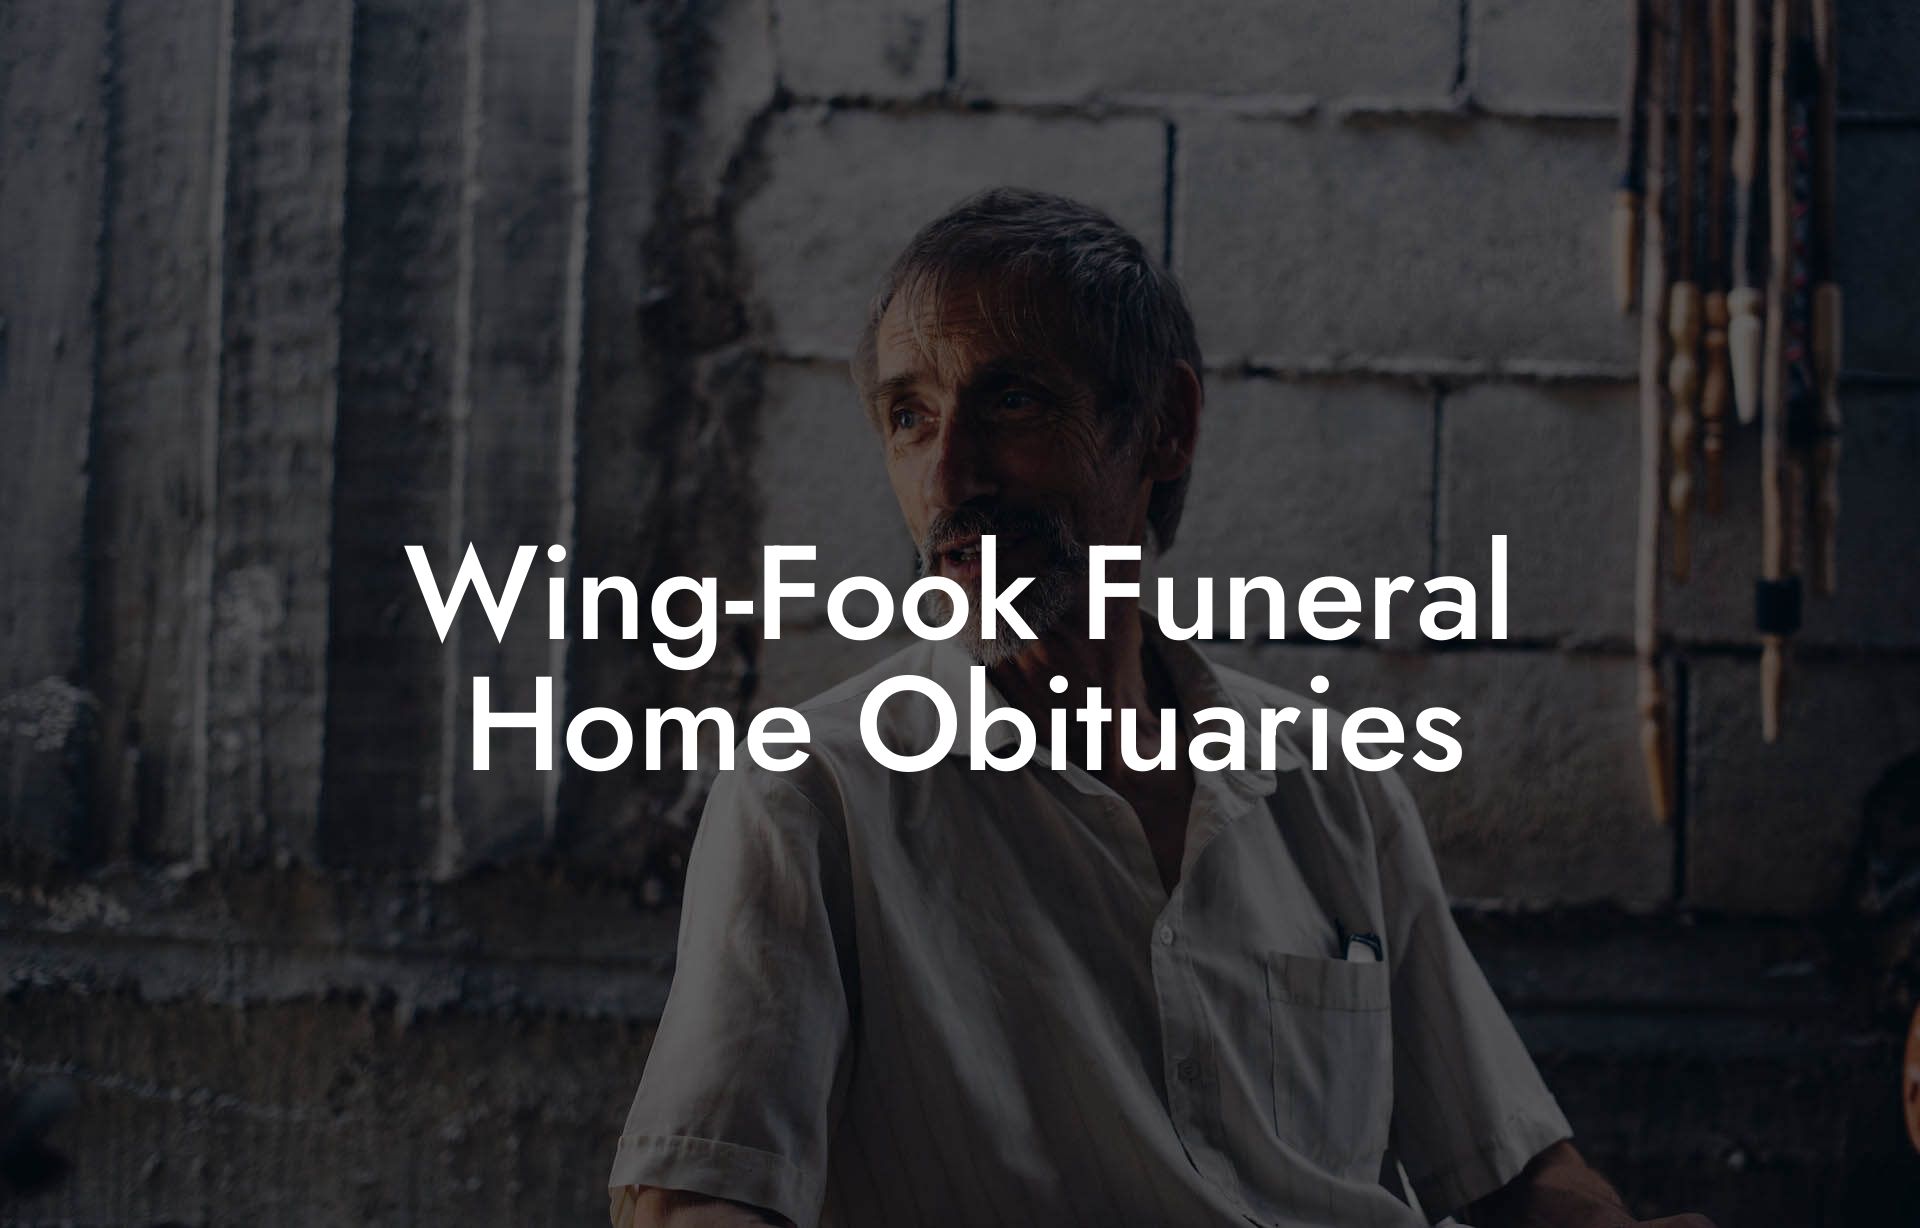 Wing-Fook Funeral Home Obituaries